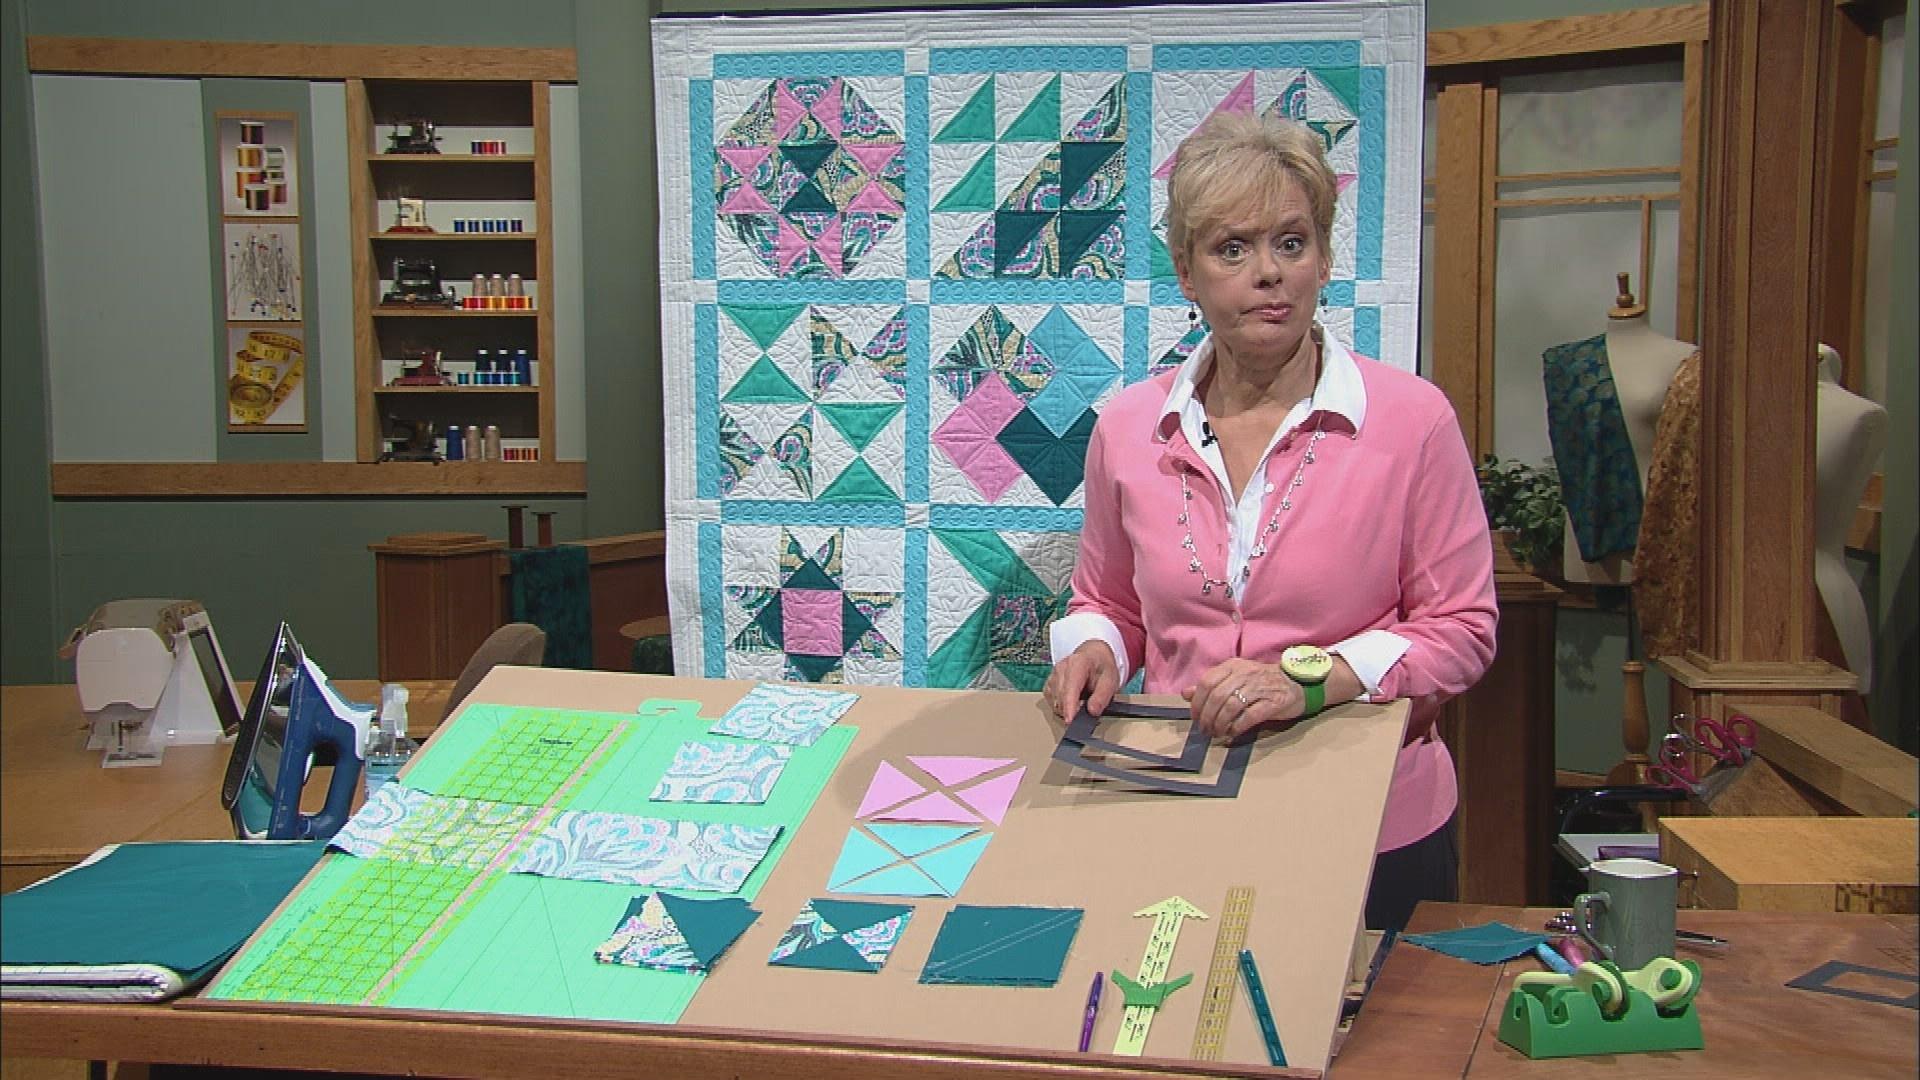 quilting sewing shows Pbs strip